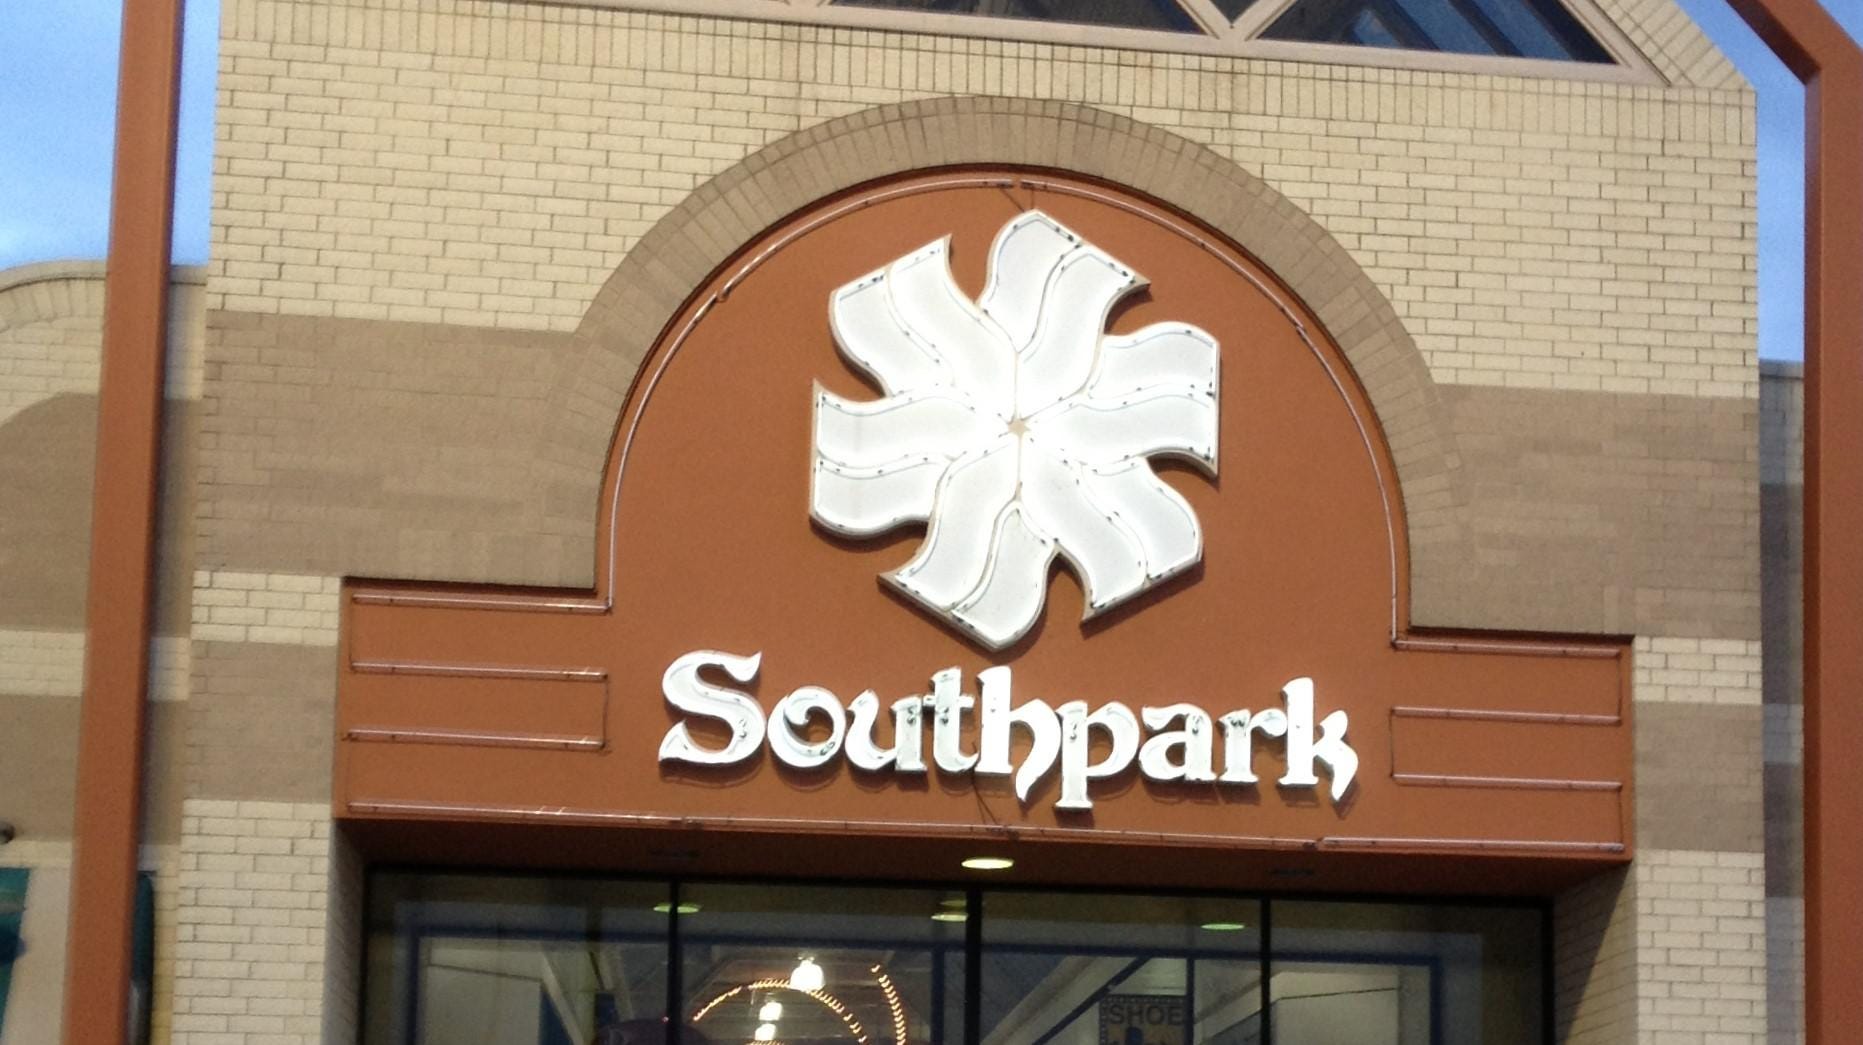 Southpark Mall open to allow stores 